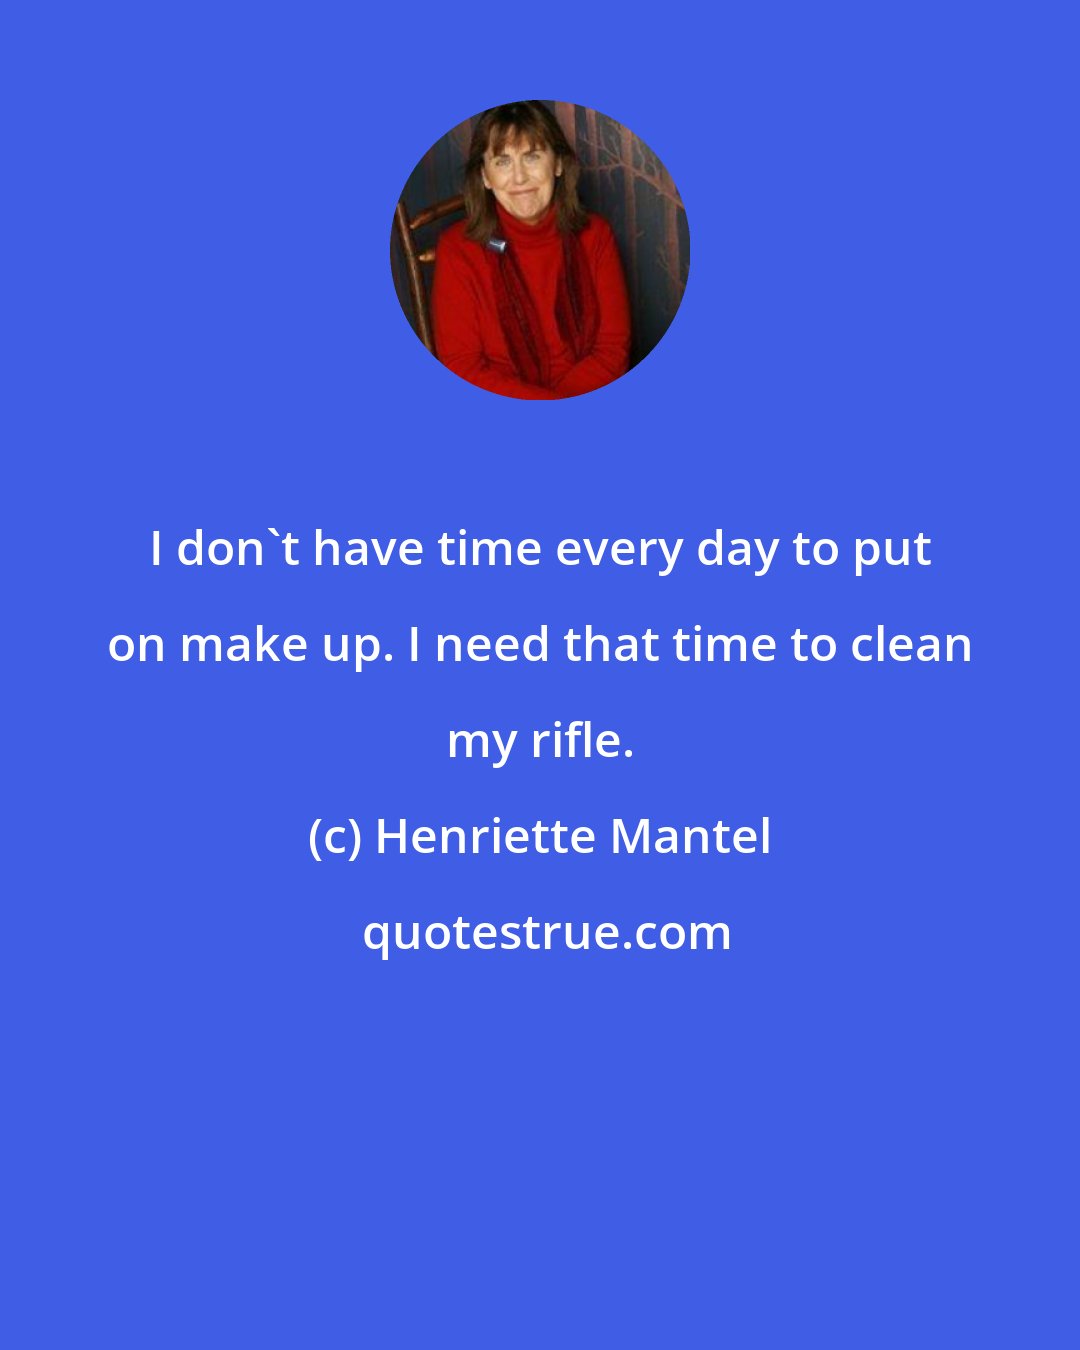 Henriette Mantel: I don't have time every day to put on make up. I need that time to clean my rifle.